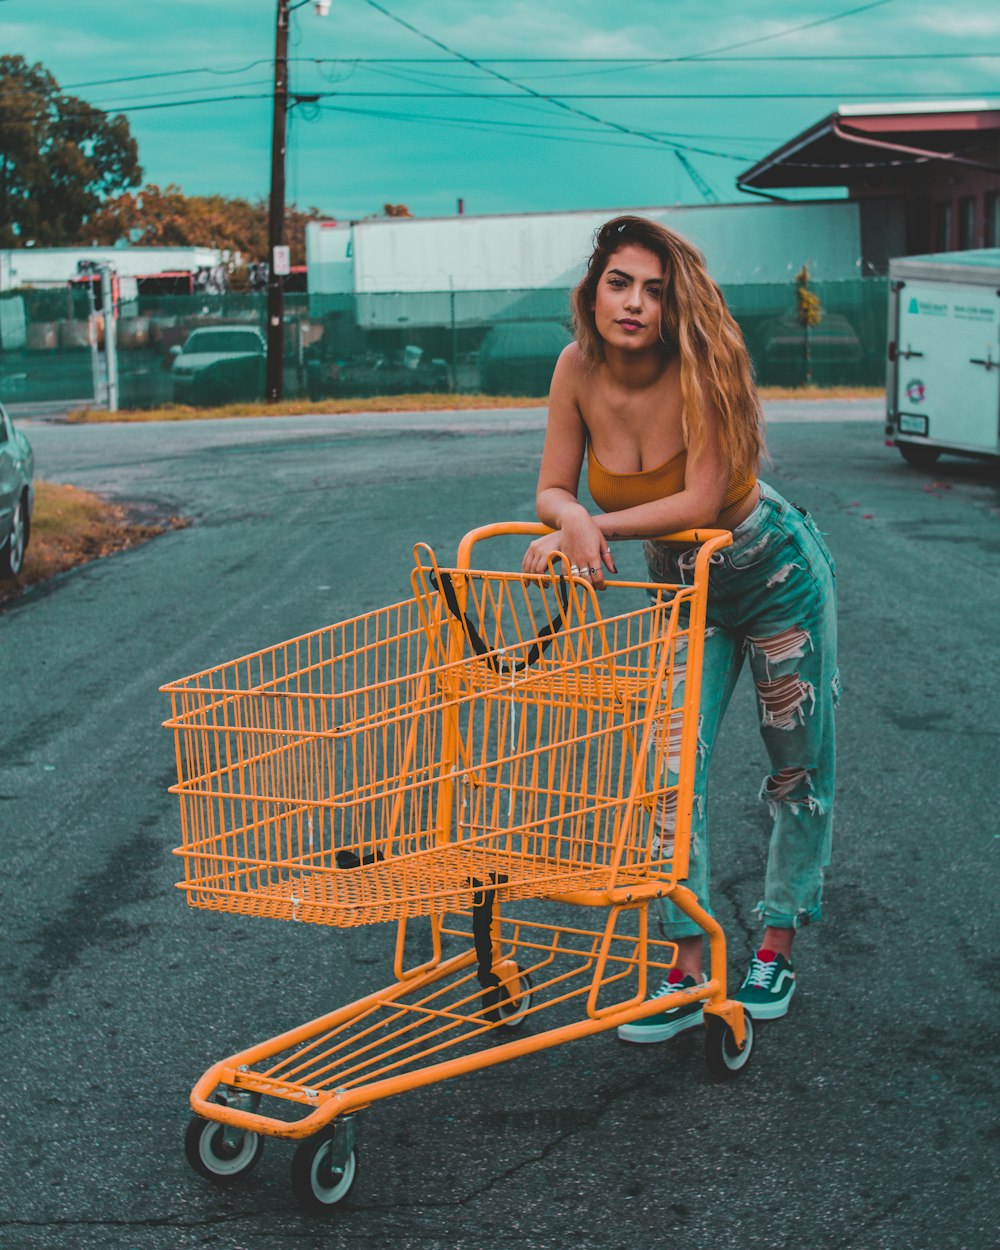 woman leaning on yellow shopping cart standing on concrete pavement during day